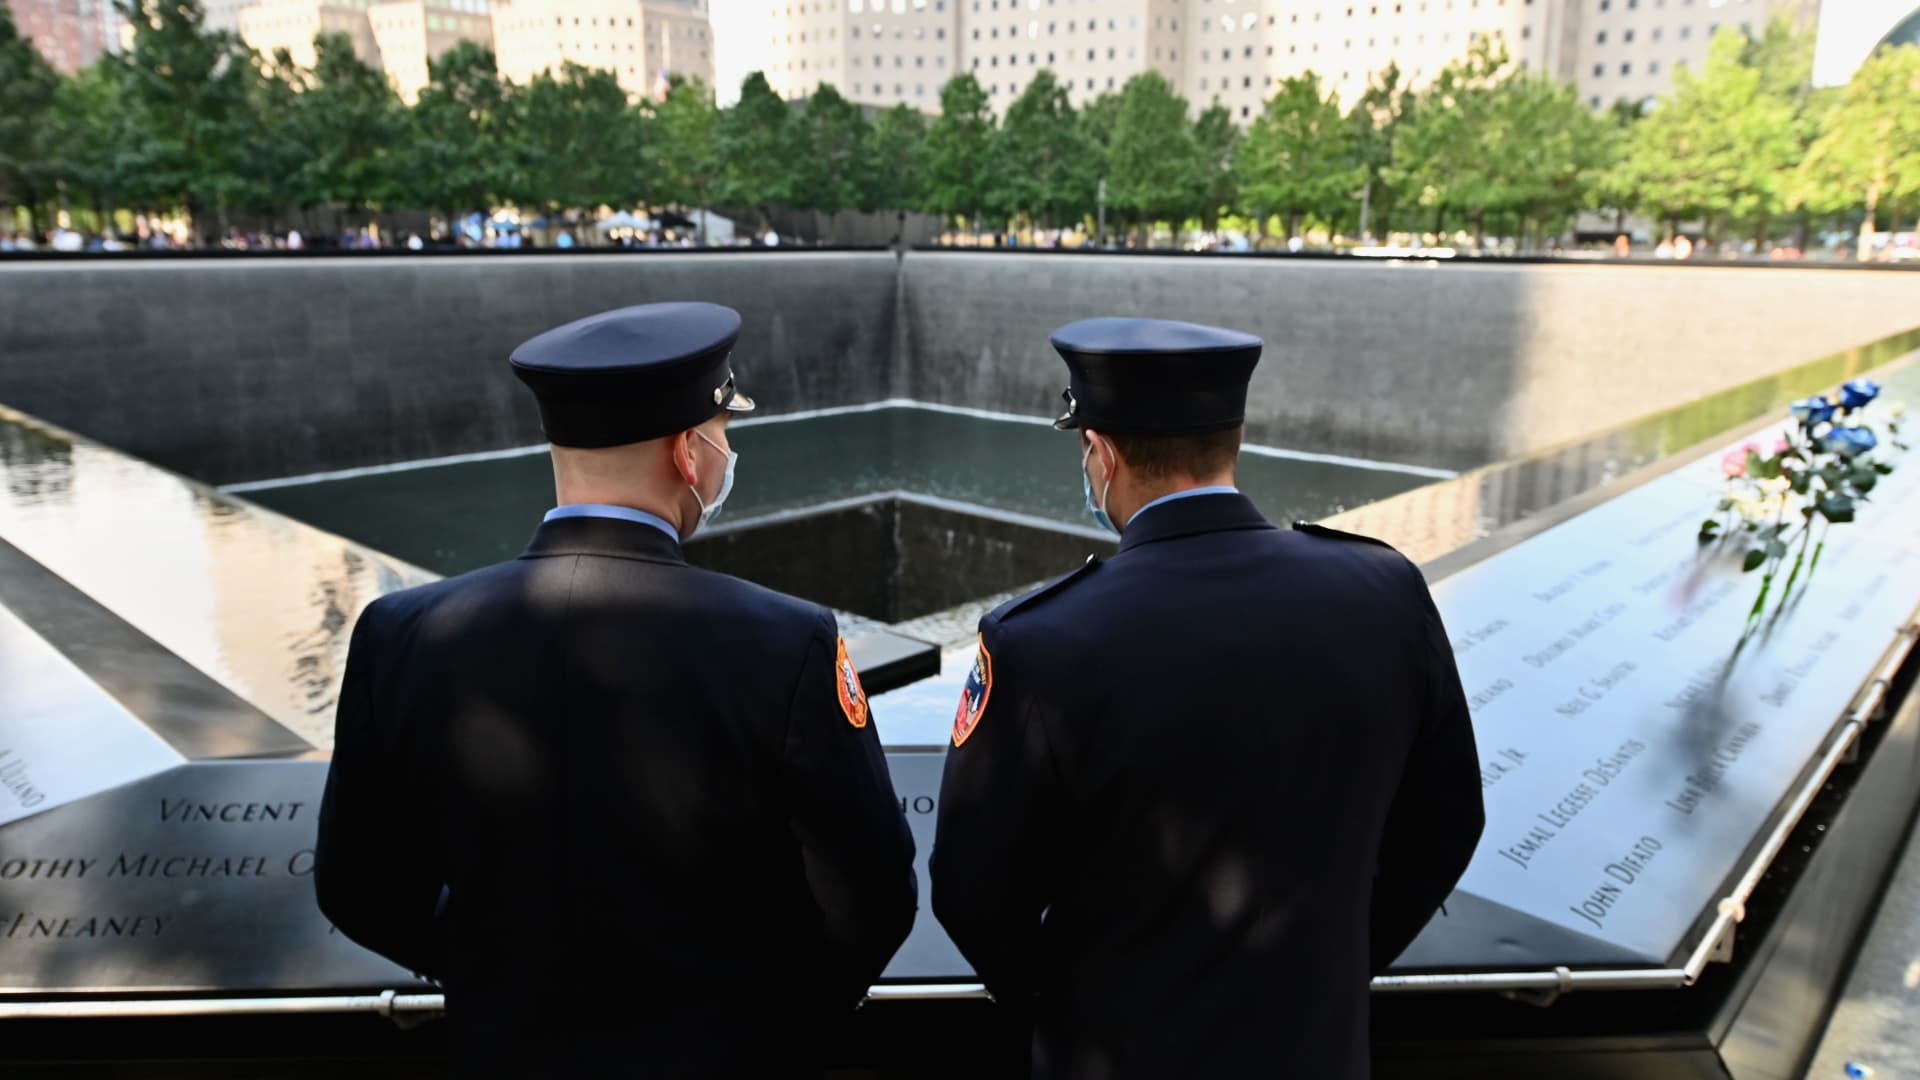 New York Firefighters gather at the 9/11 Memorial & Museum in New York on September 11, 2020, as the US commemorates the 19th anniversary of the 9/11 attacks.